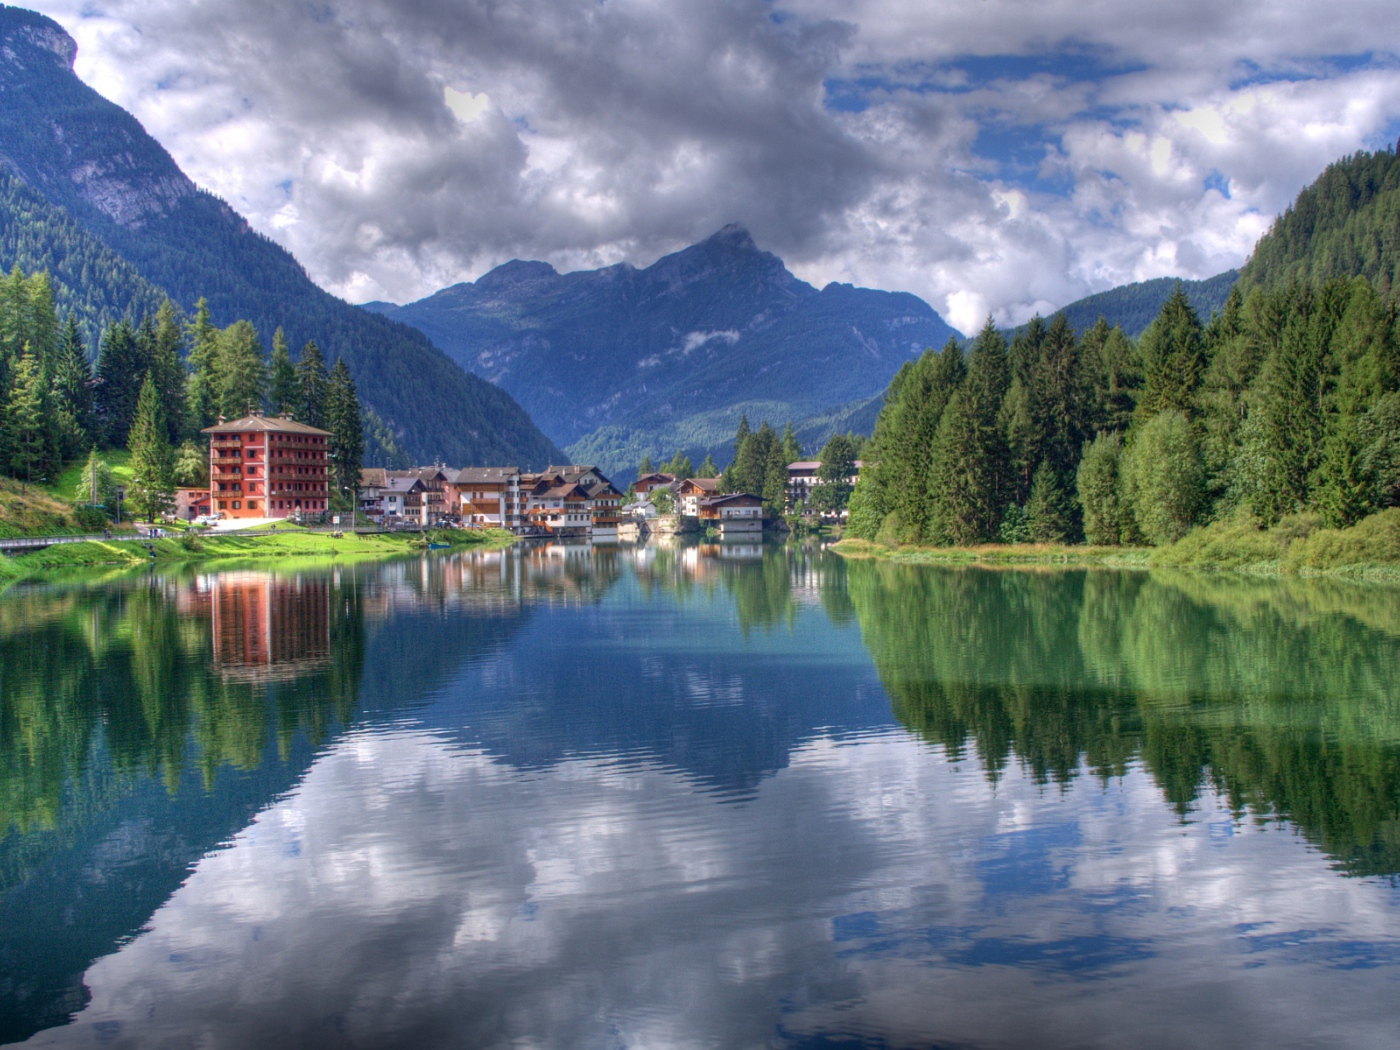 Lake in the resort Alleghe, Italy